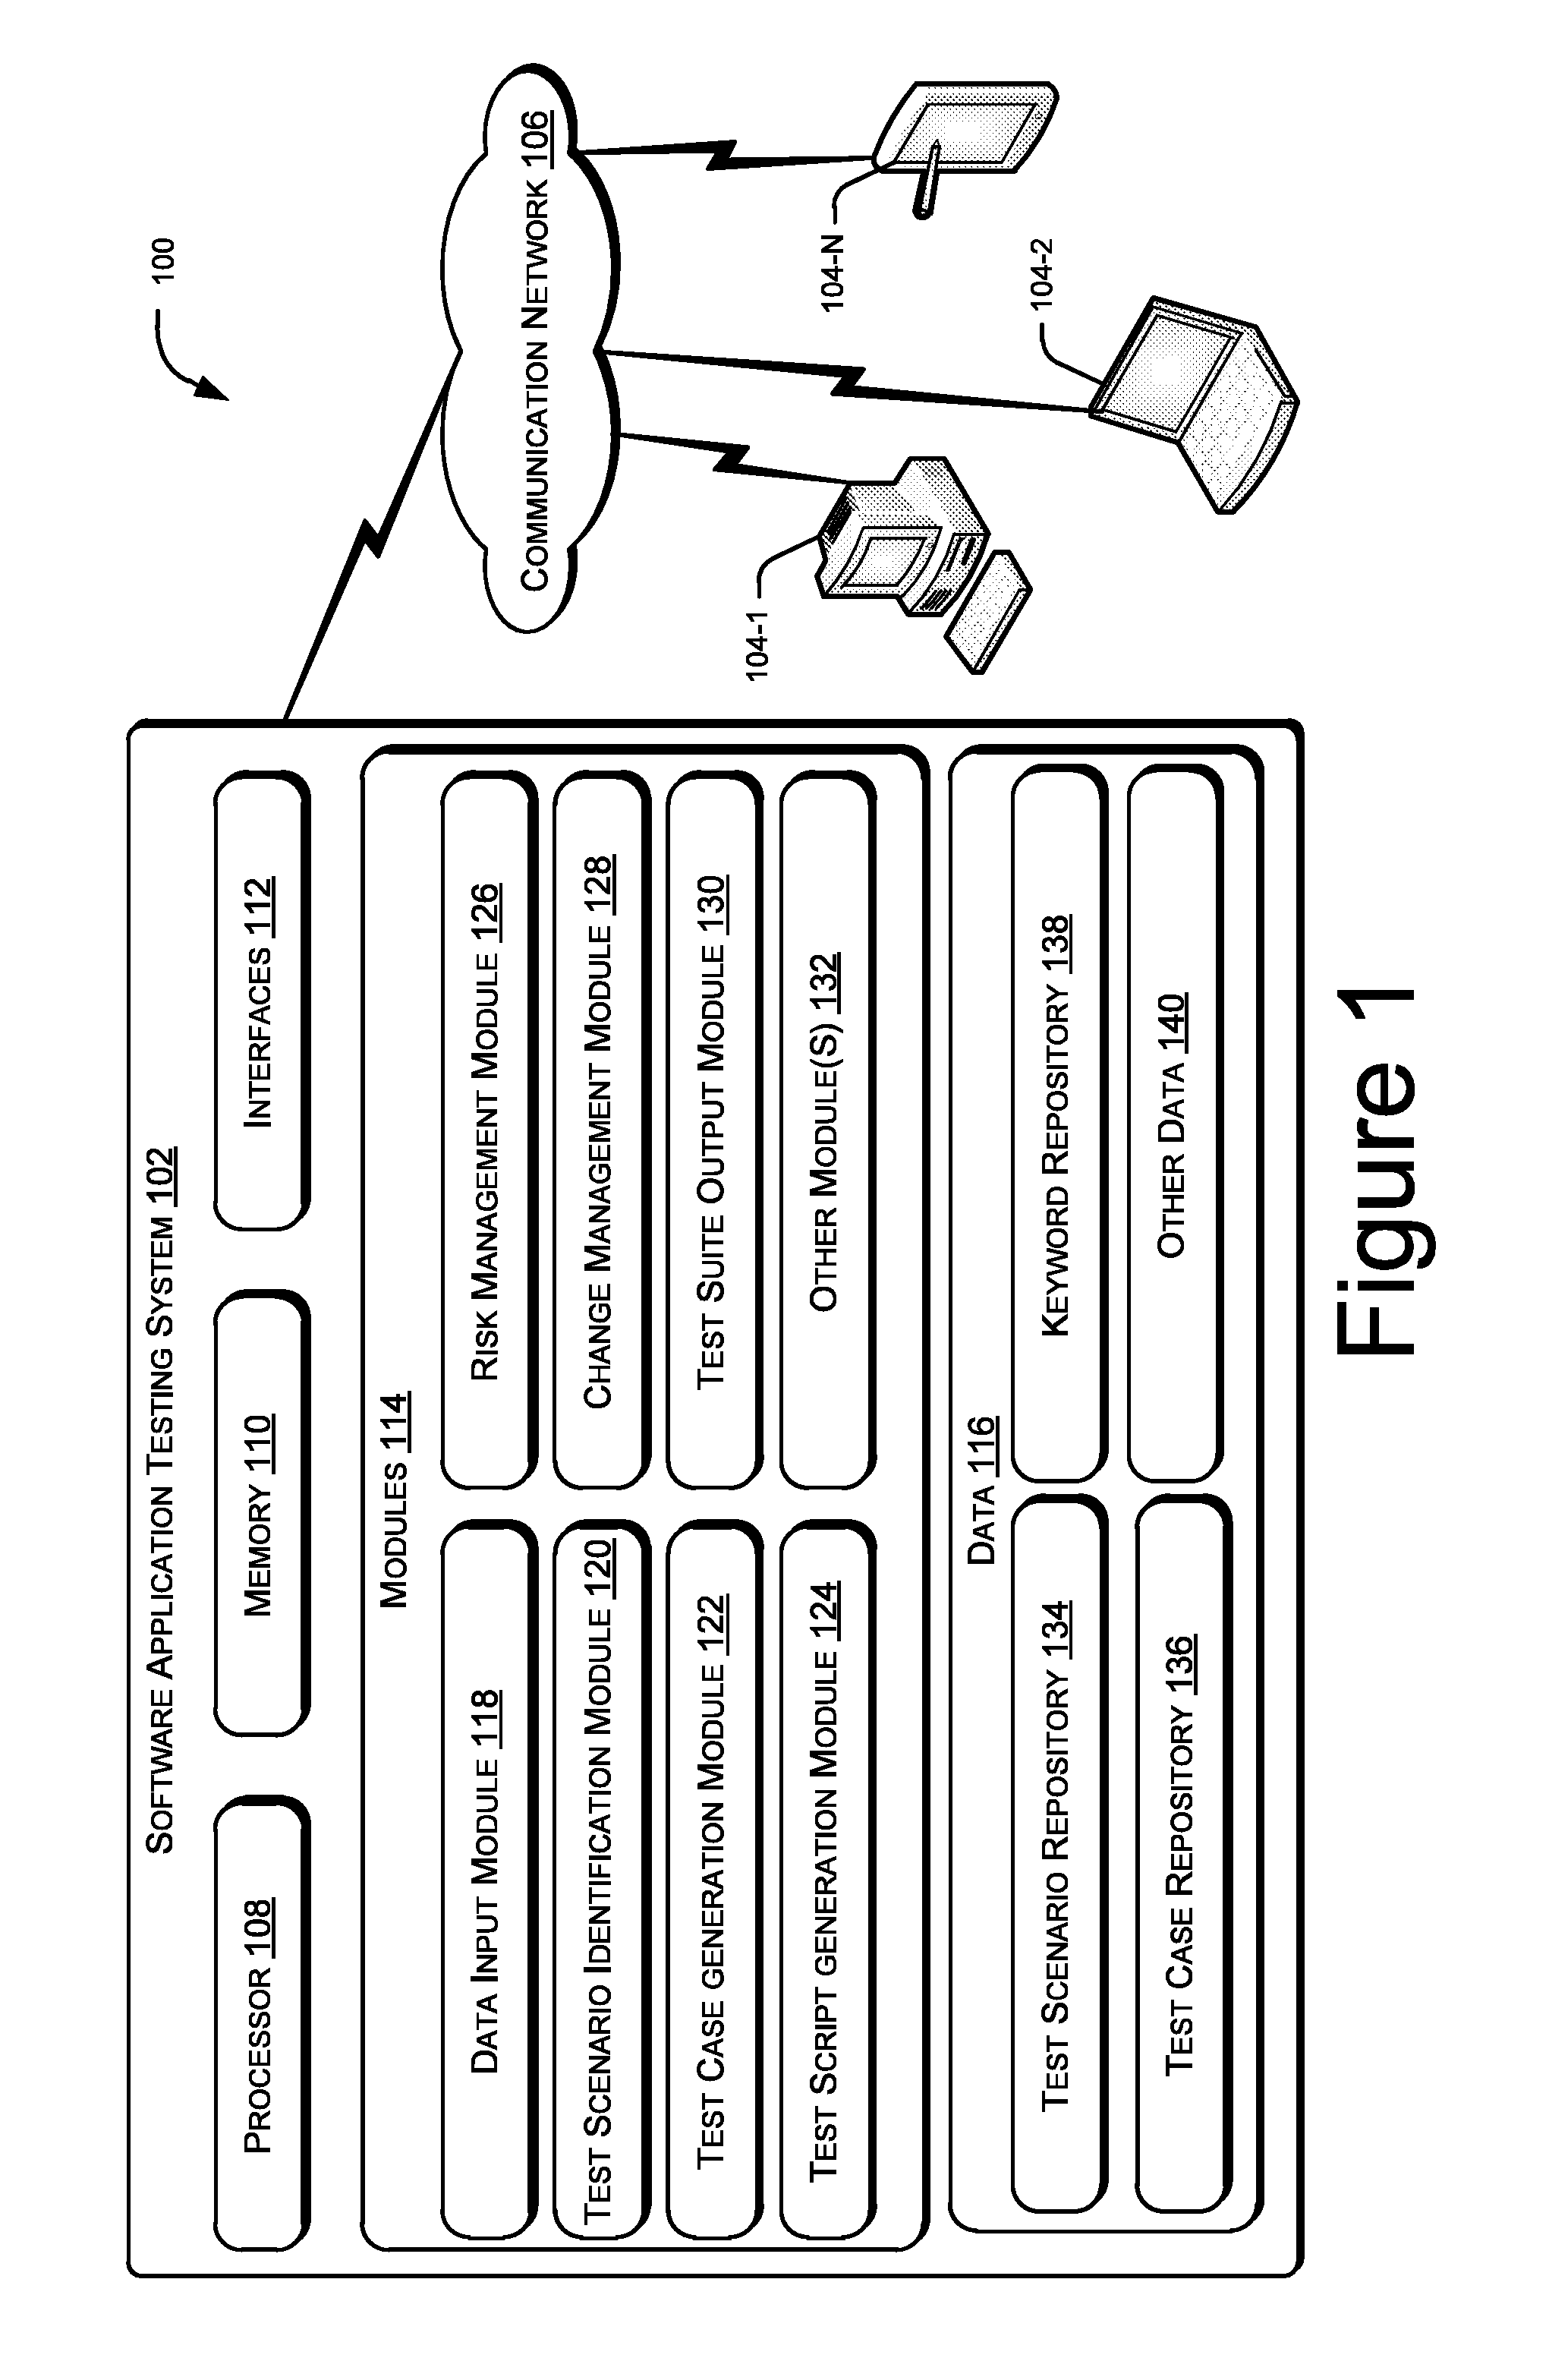 System and method for testing software applications